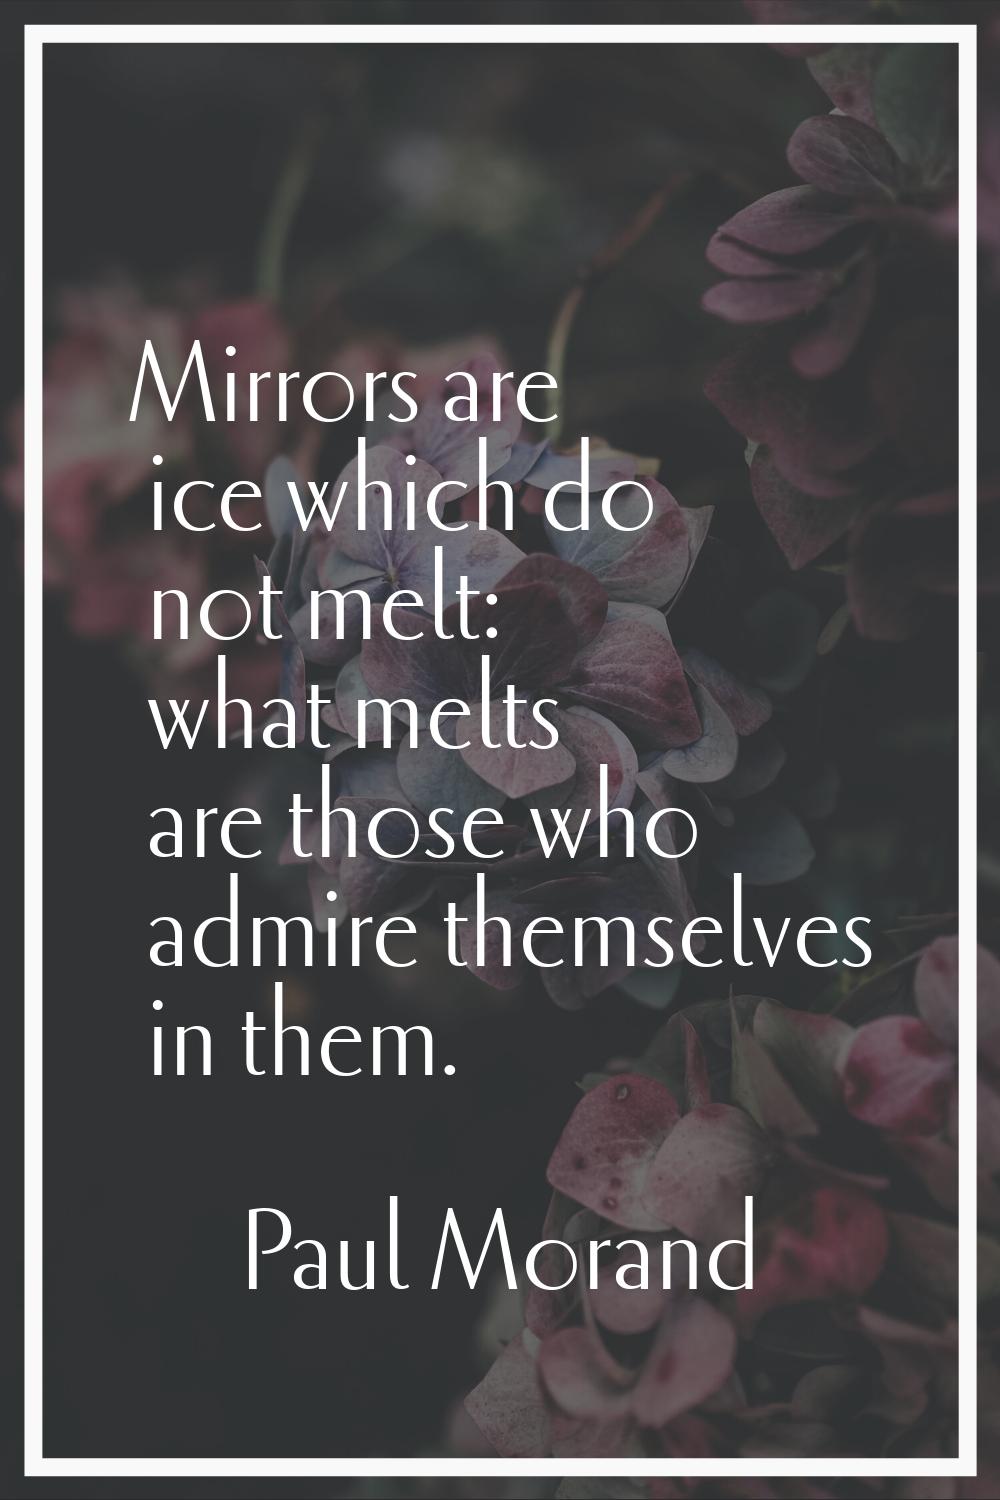 Mirrors are ice which do not melt: what melts are those who admire themselves in them.